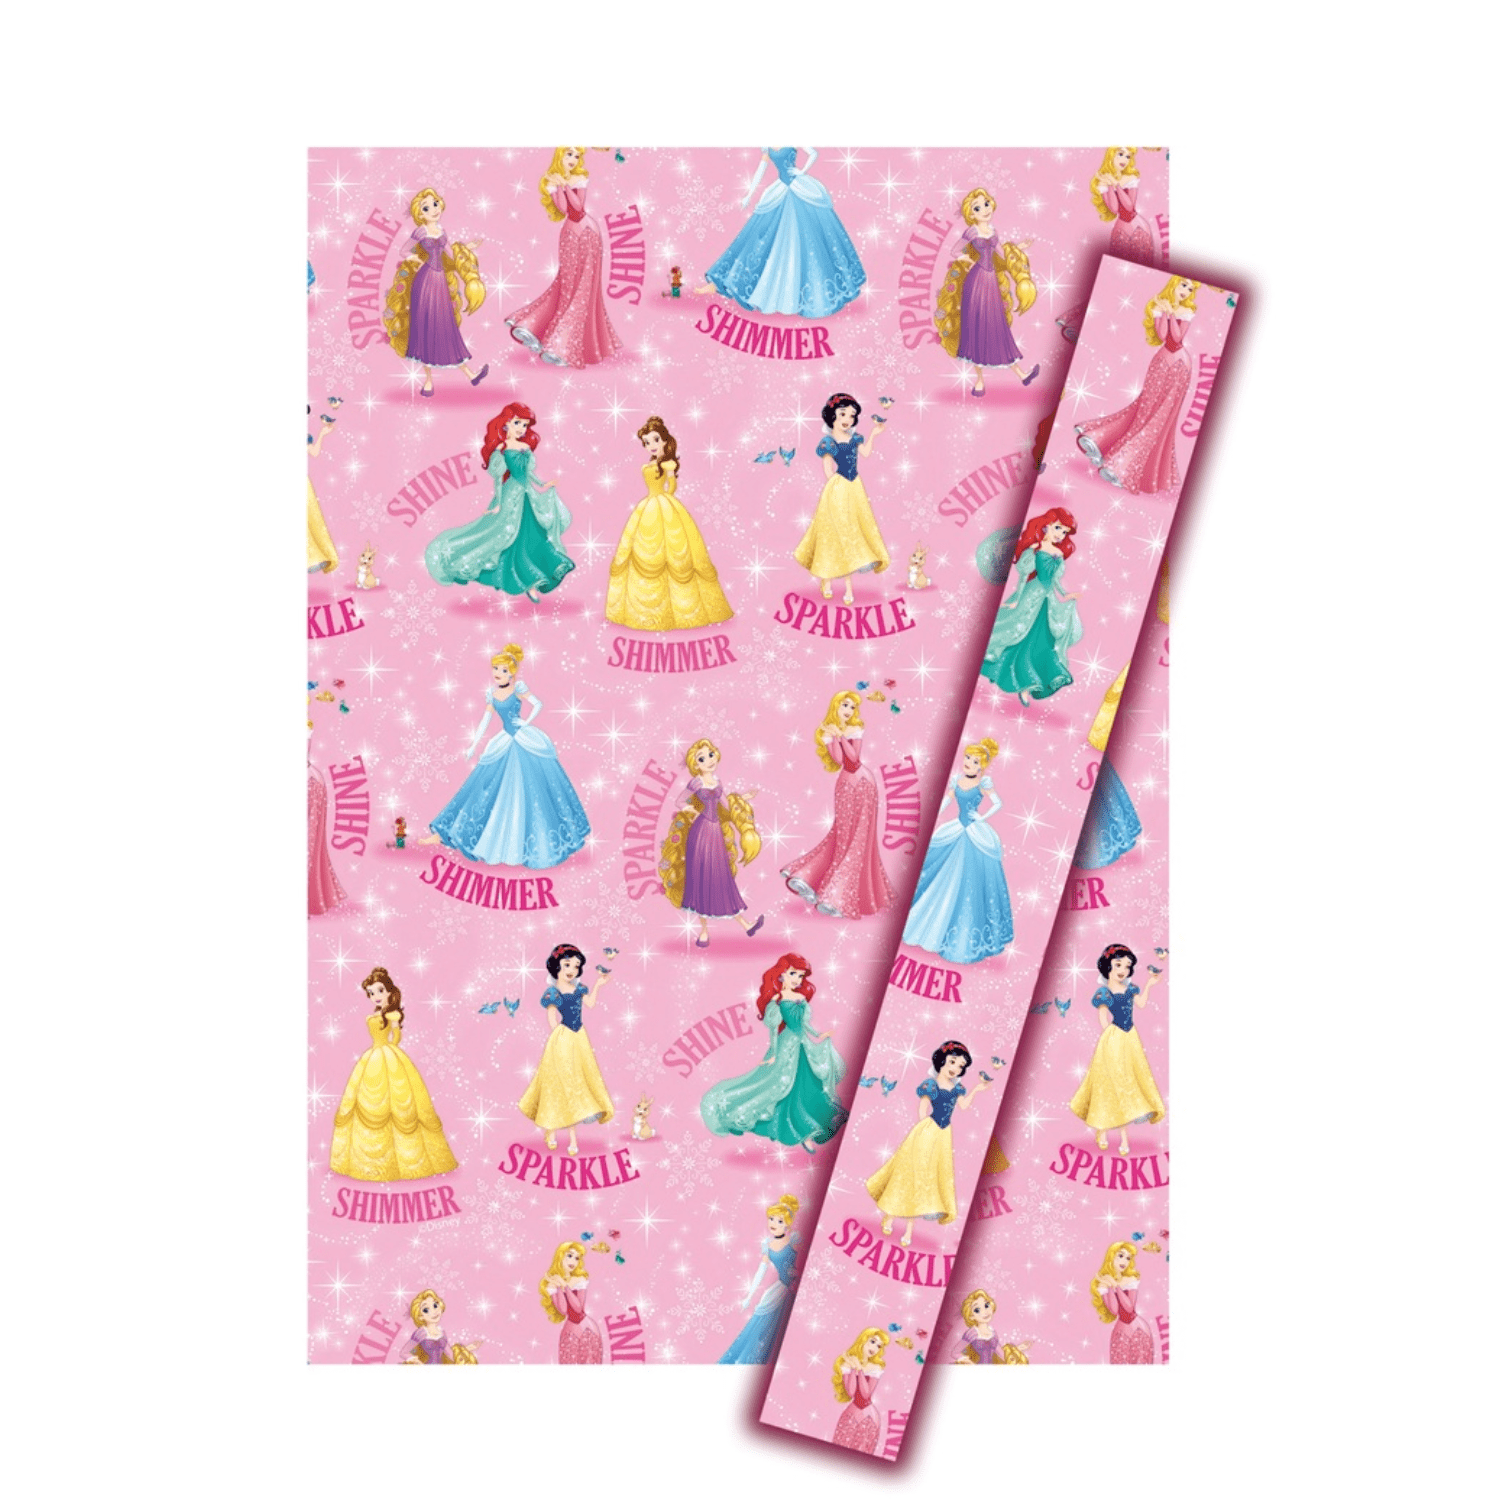 Wrapping Paper Storage Containers Craft Paper Wrapping Paper Christmas Cute  Cartoon Print Pink Colorful Wrapping Paper Holiday Girls Princess Birthday